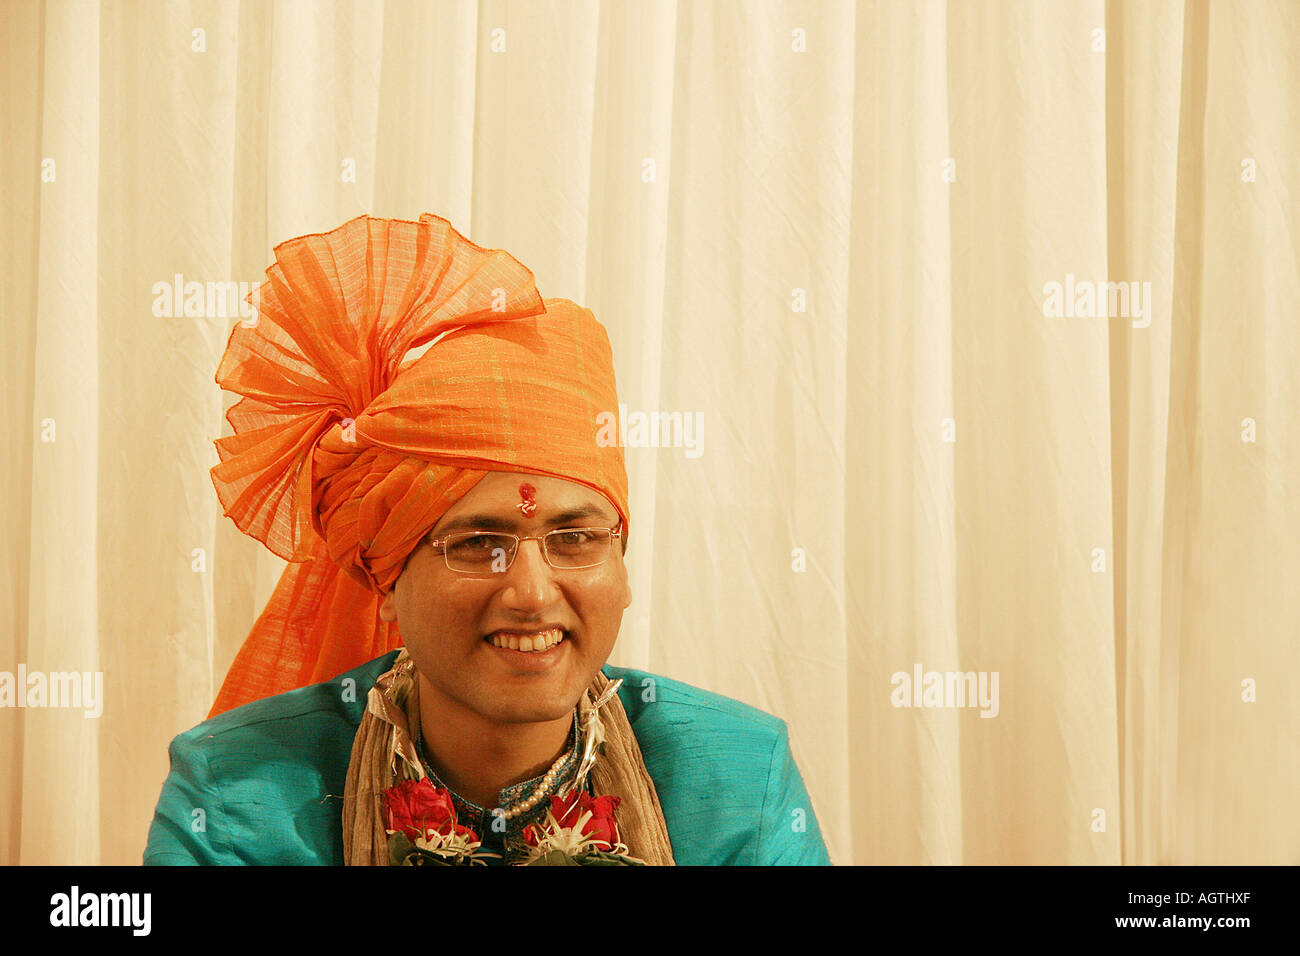 SSK79501 An Indian Gujarati Groom on his wedding day India Model Release 667 Stock Photo